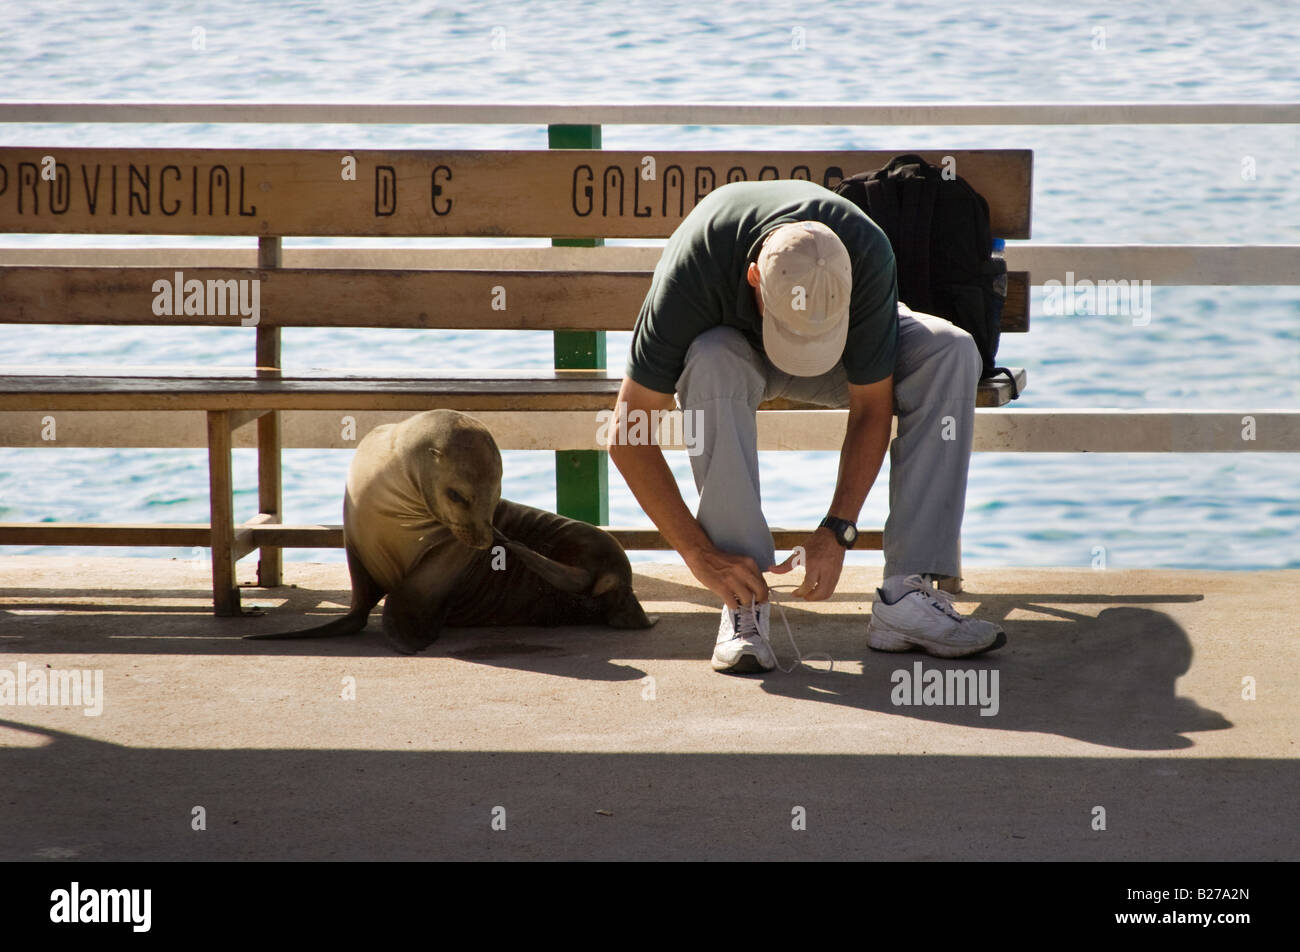 A man and a sea lion sitting together in harmony on a bench in the Galapagos Islands Stock Photo